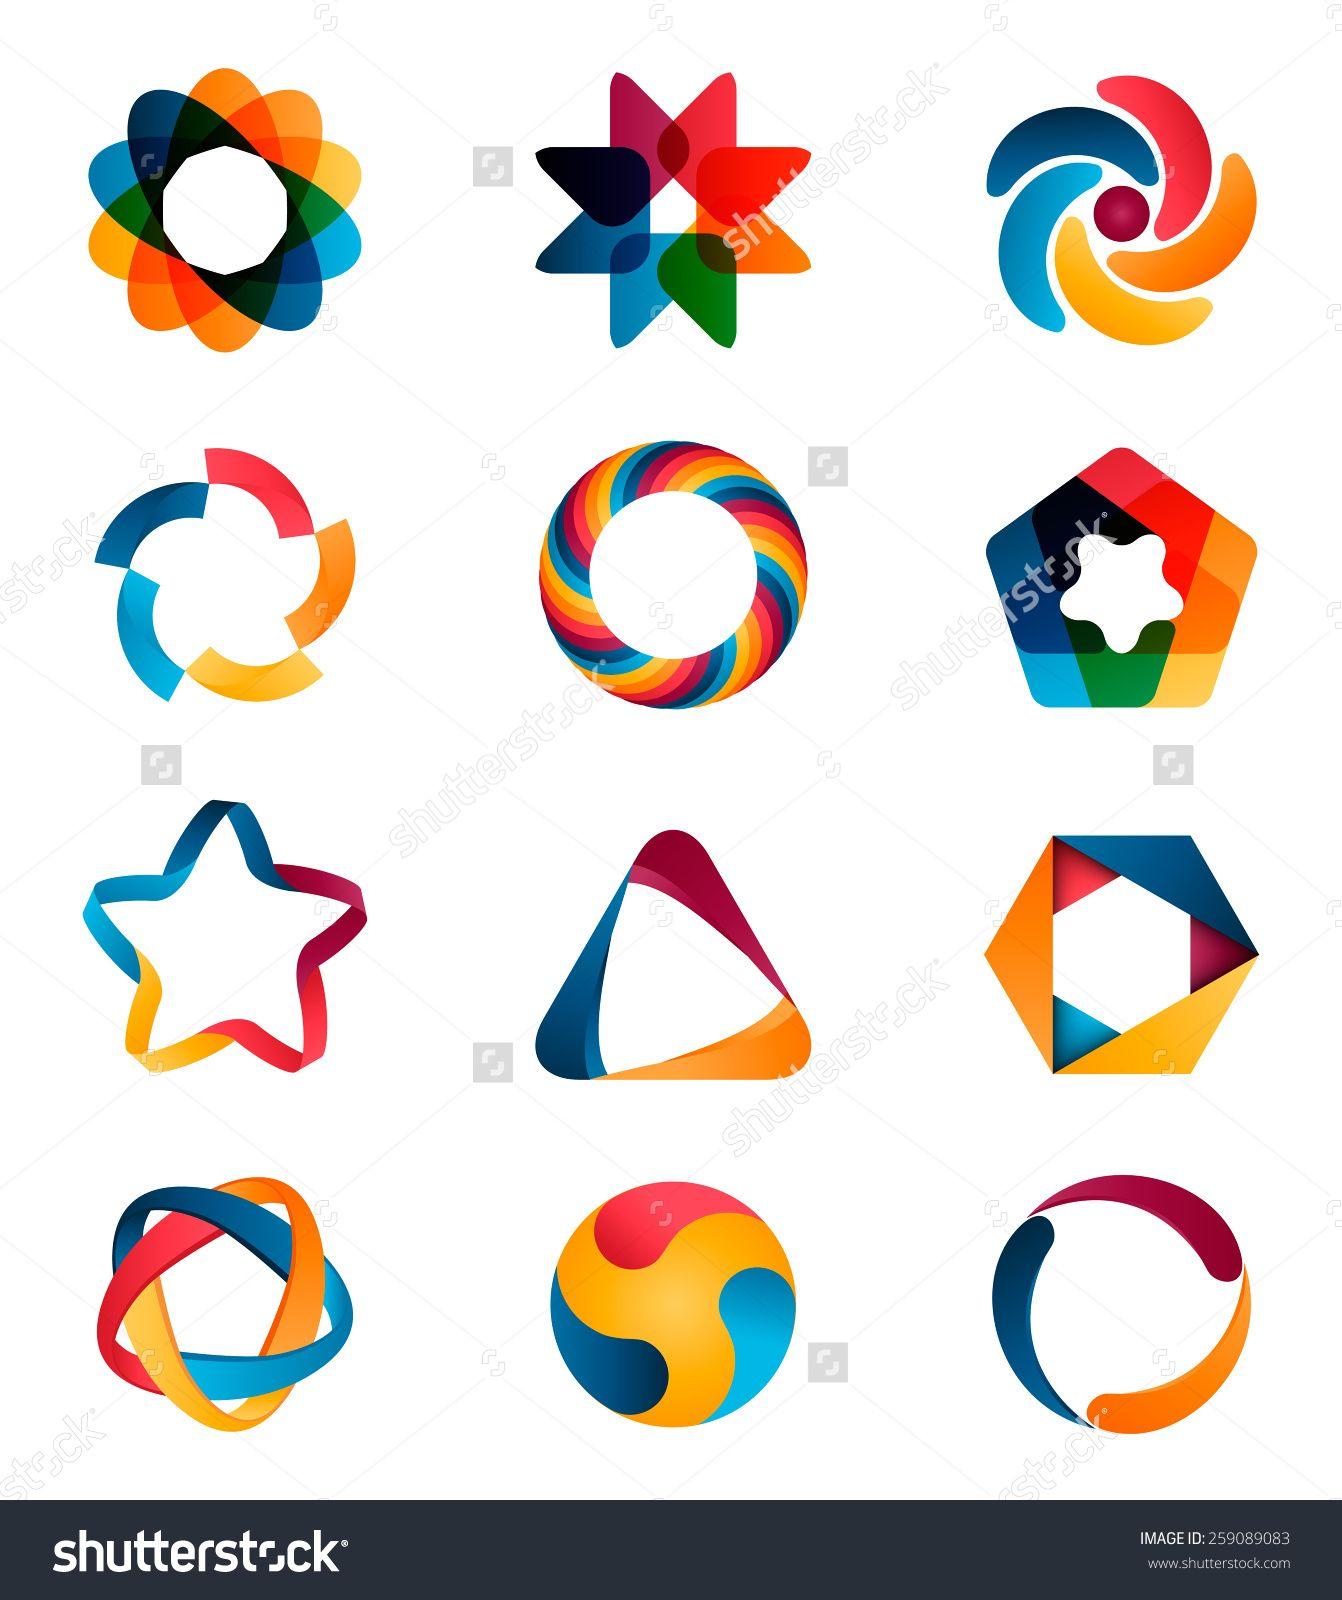 Interlocking Circles Logo - The best free Pentagon clipart images. Download from 11 free ...